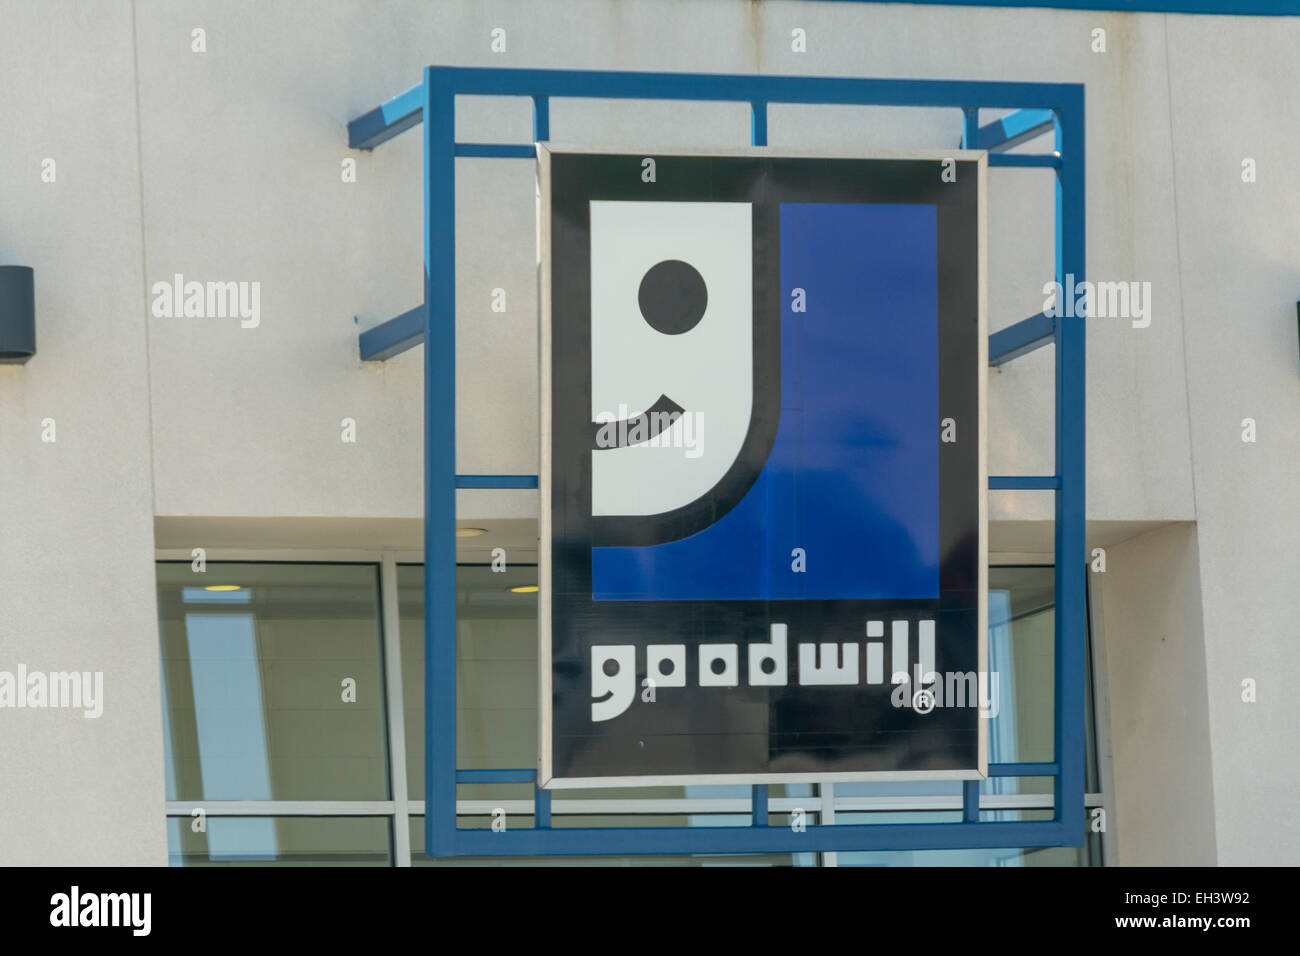 Goodwill store sign Stock Photo